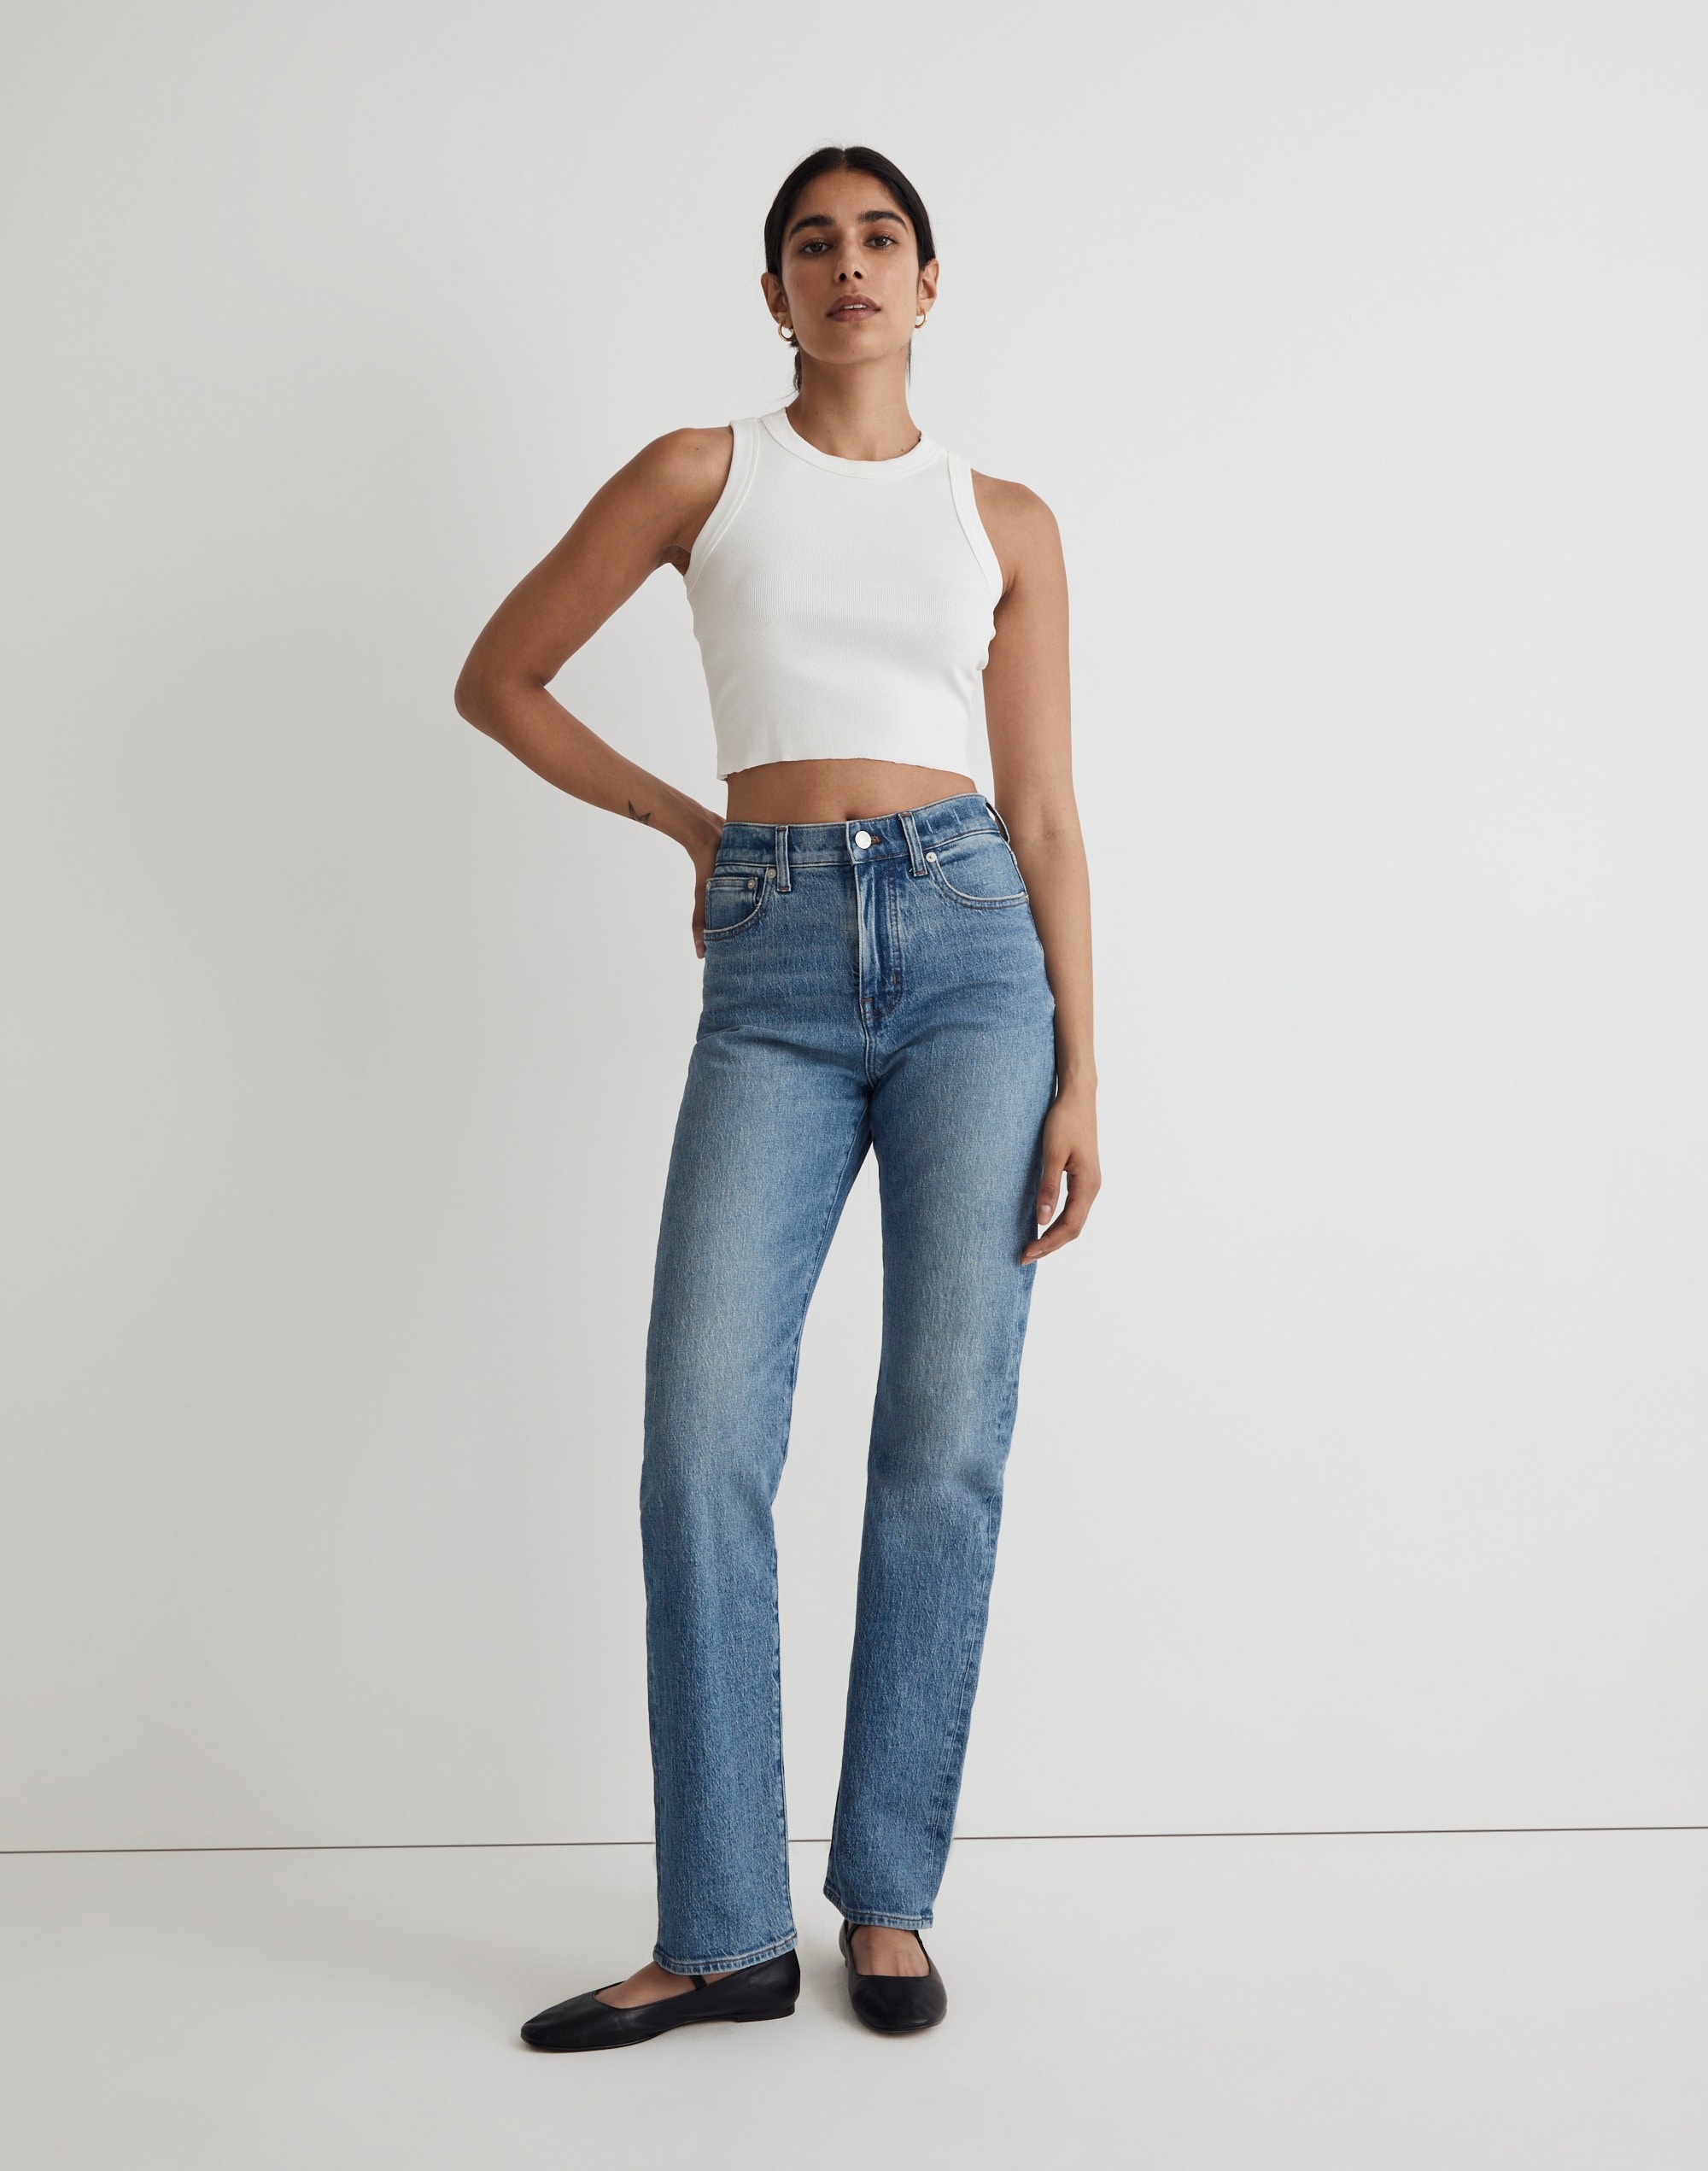  Other Stories Dear cotton 90s cut jeans in mid wash - MBLUE